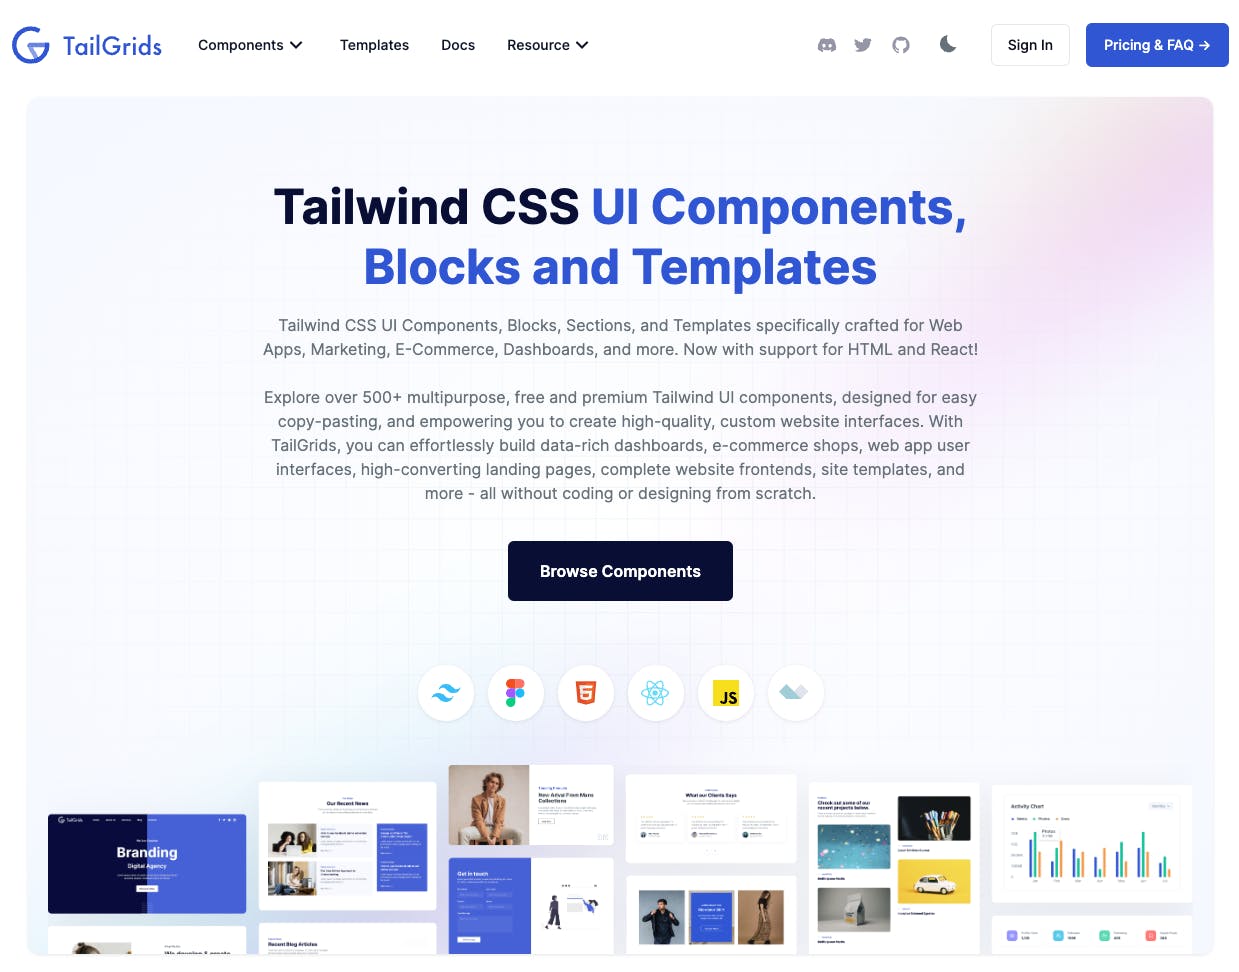 TailGrids Tailwind CSS component library image.